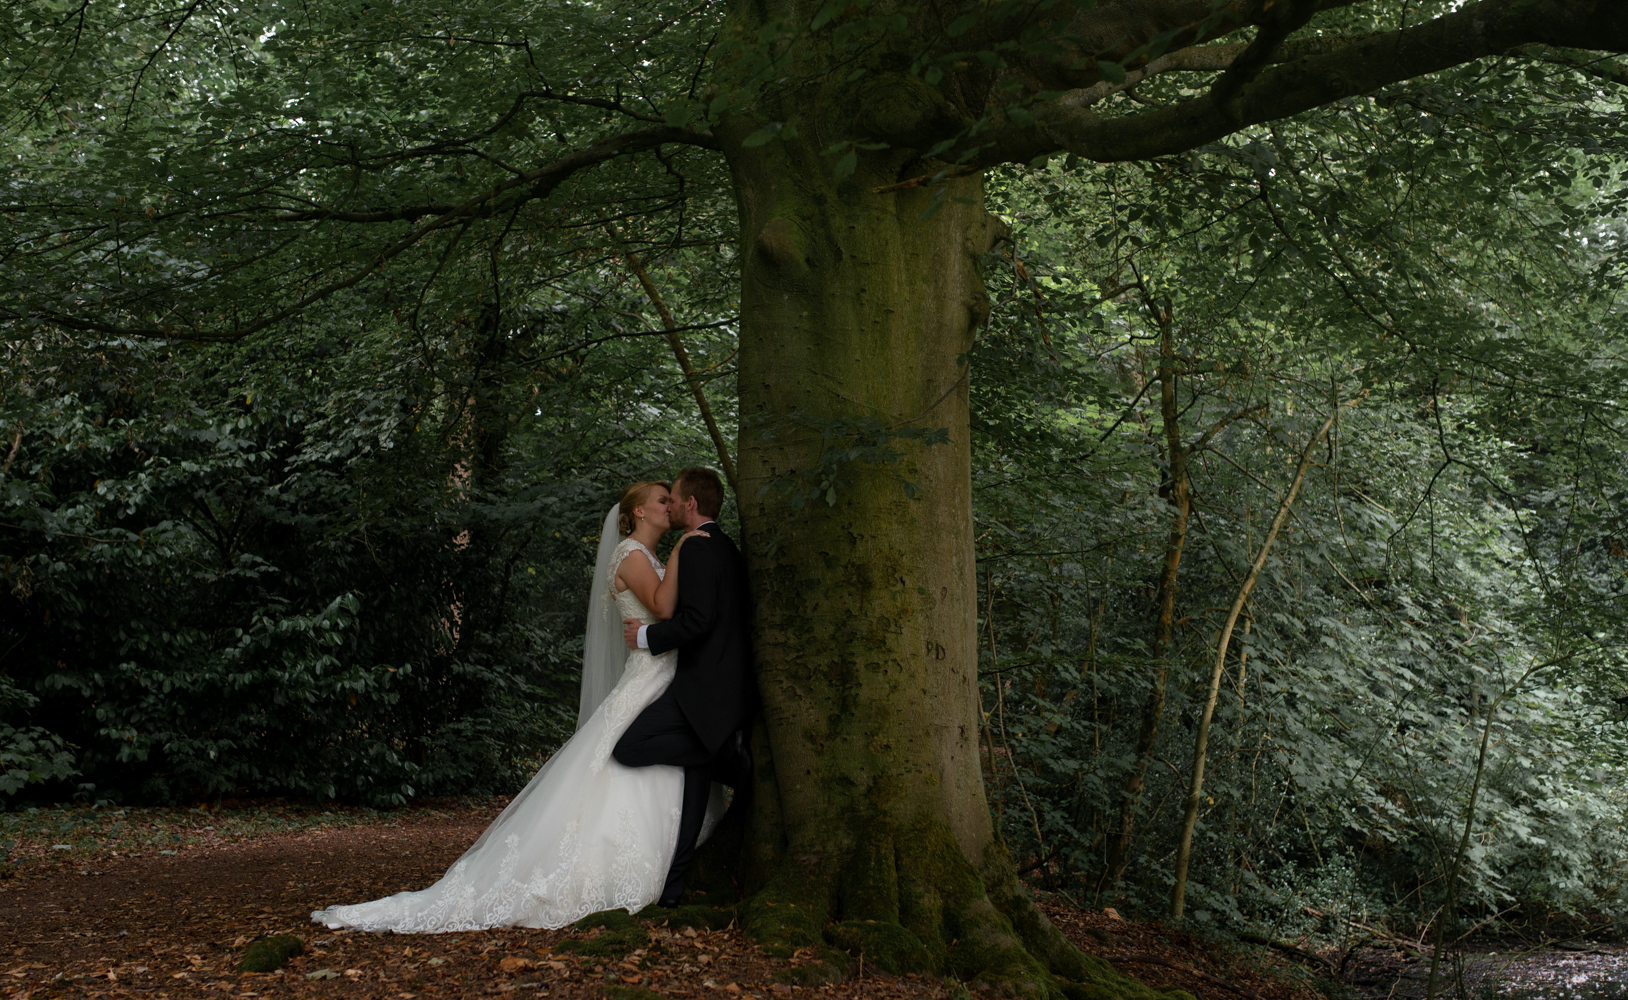 The bride and groom standing in the woods